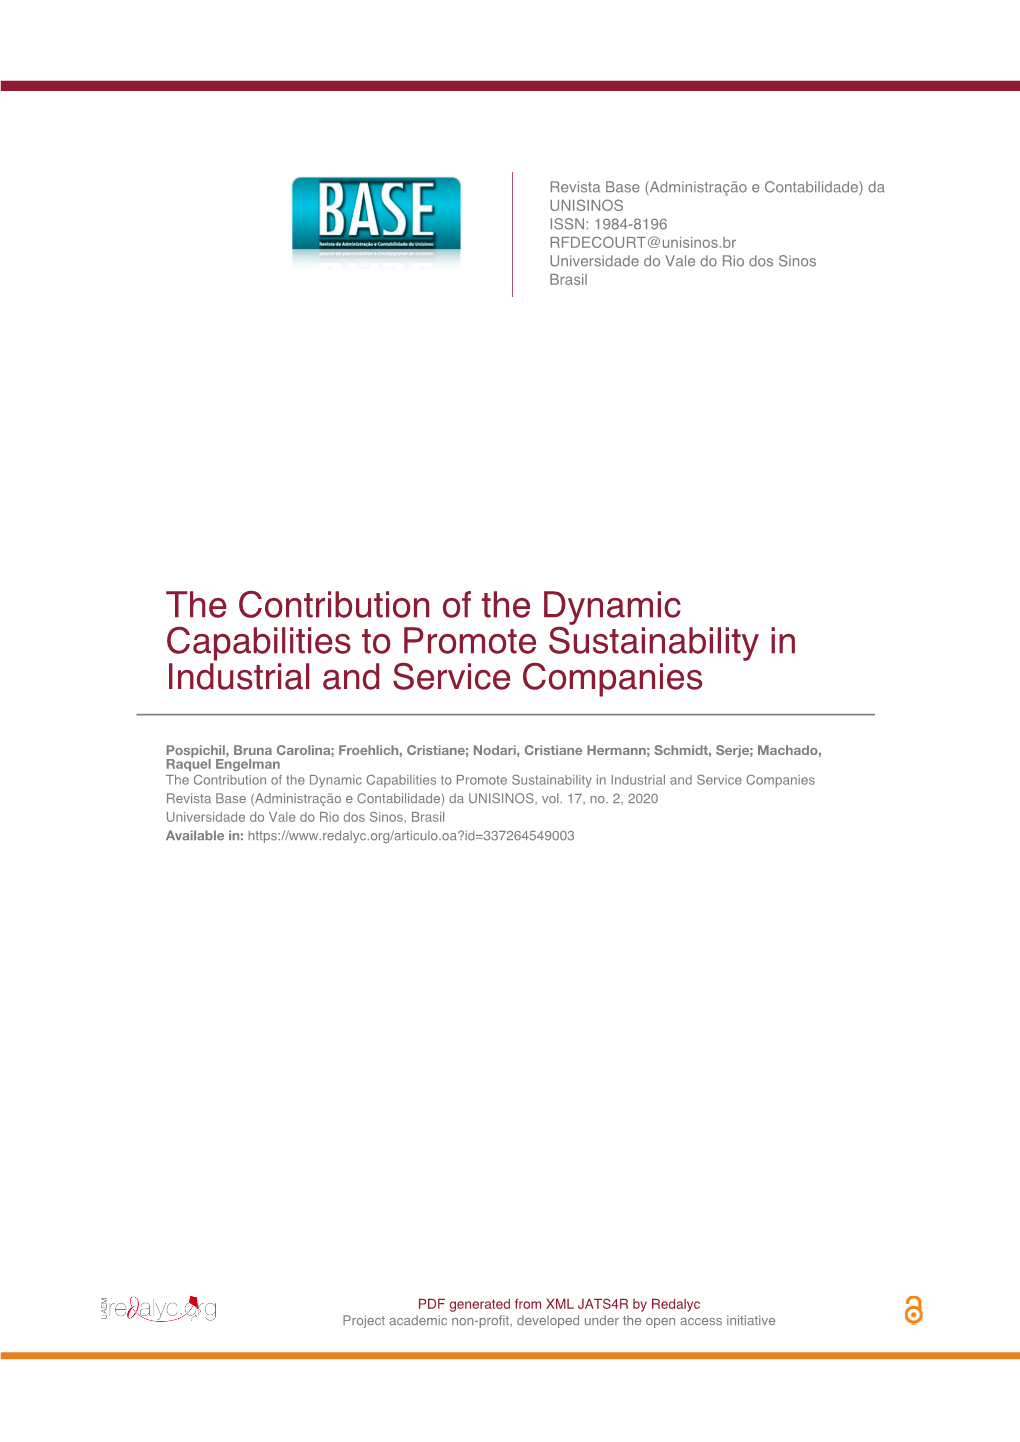 The Contribution of the Dynamic Capabilities to Promote Sustainability in Industrial and Service Companies